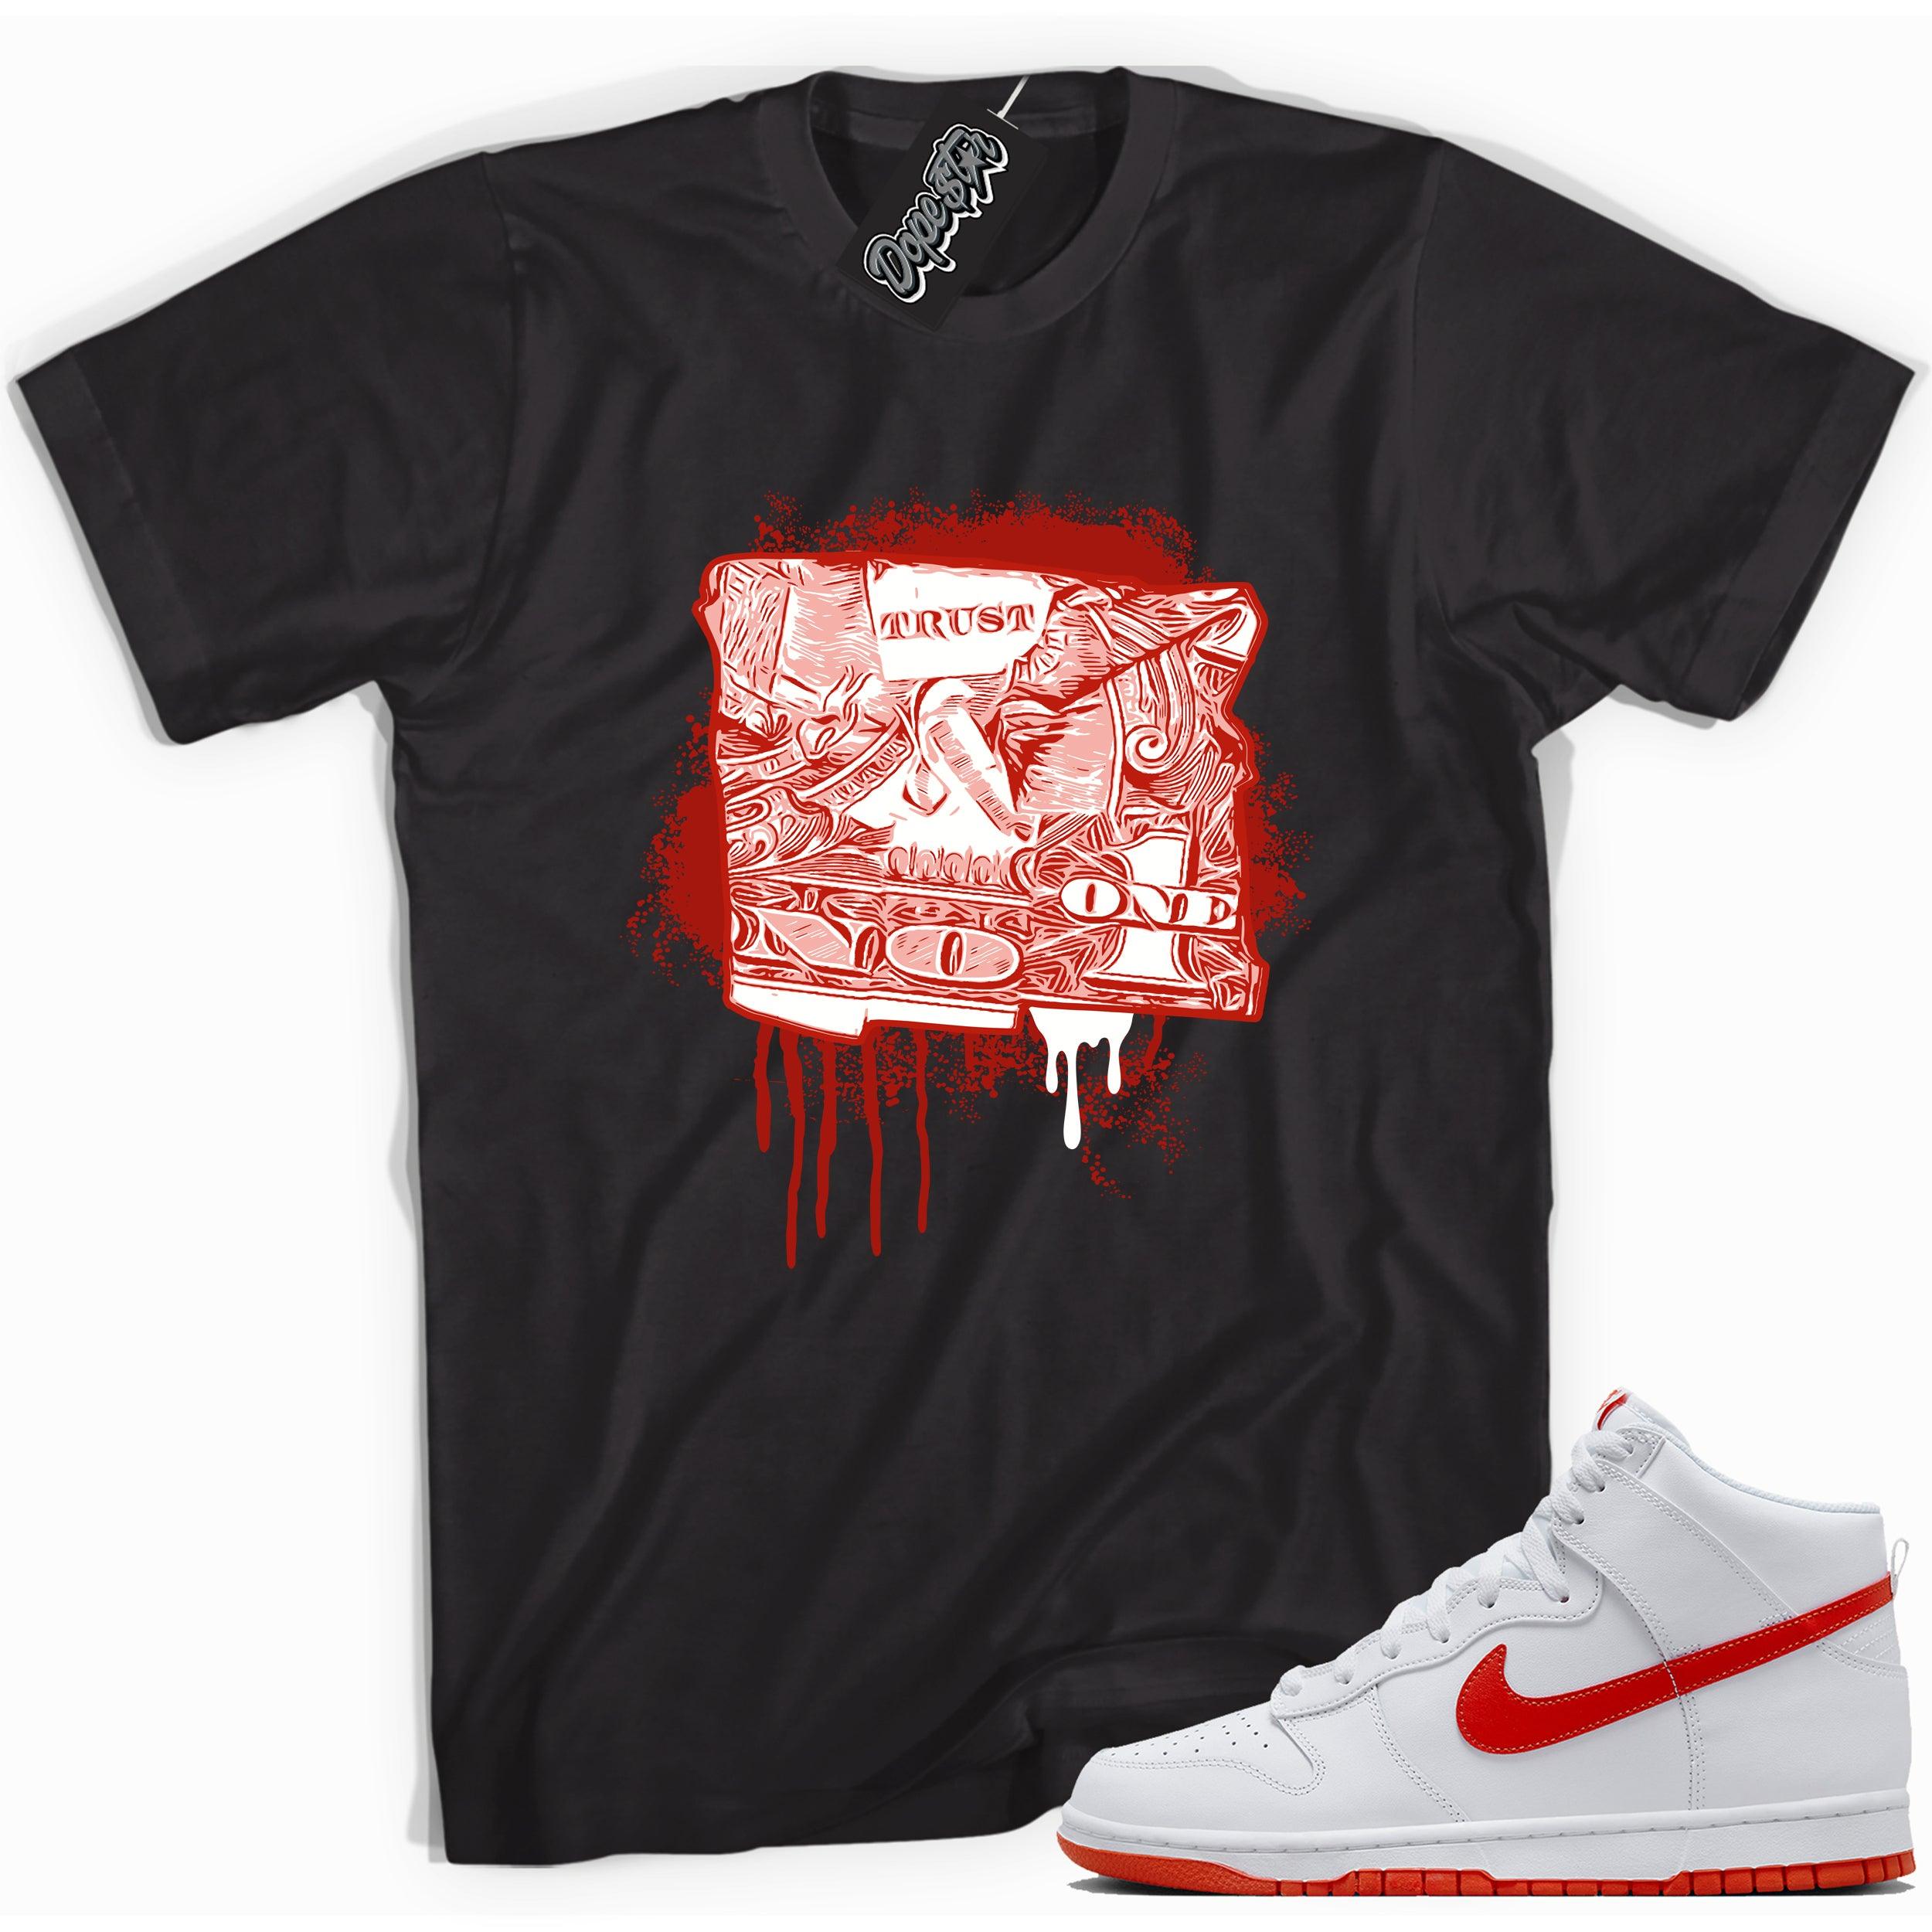 Cool black graphic tee with 'trust no one dollar bill' print, that perfectly matches Nike Dunk High White Picante Red sneakers.